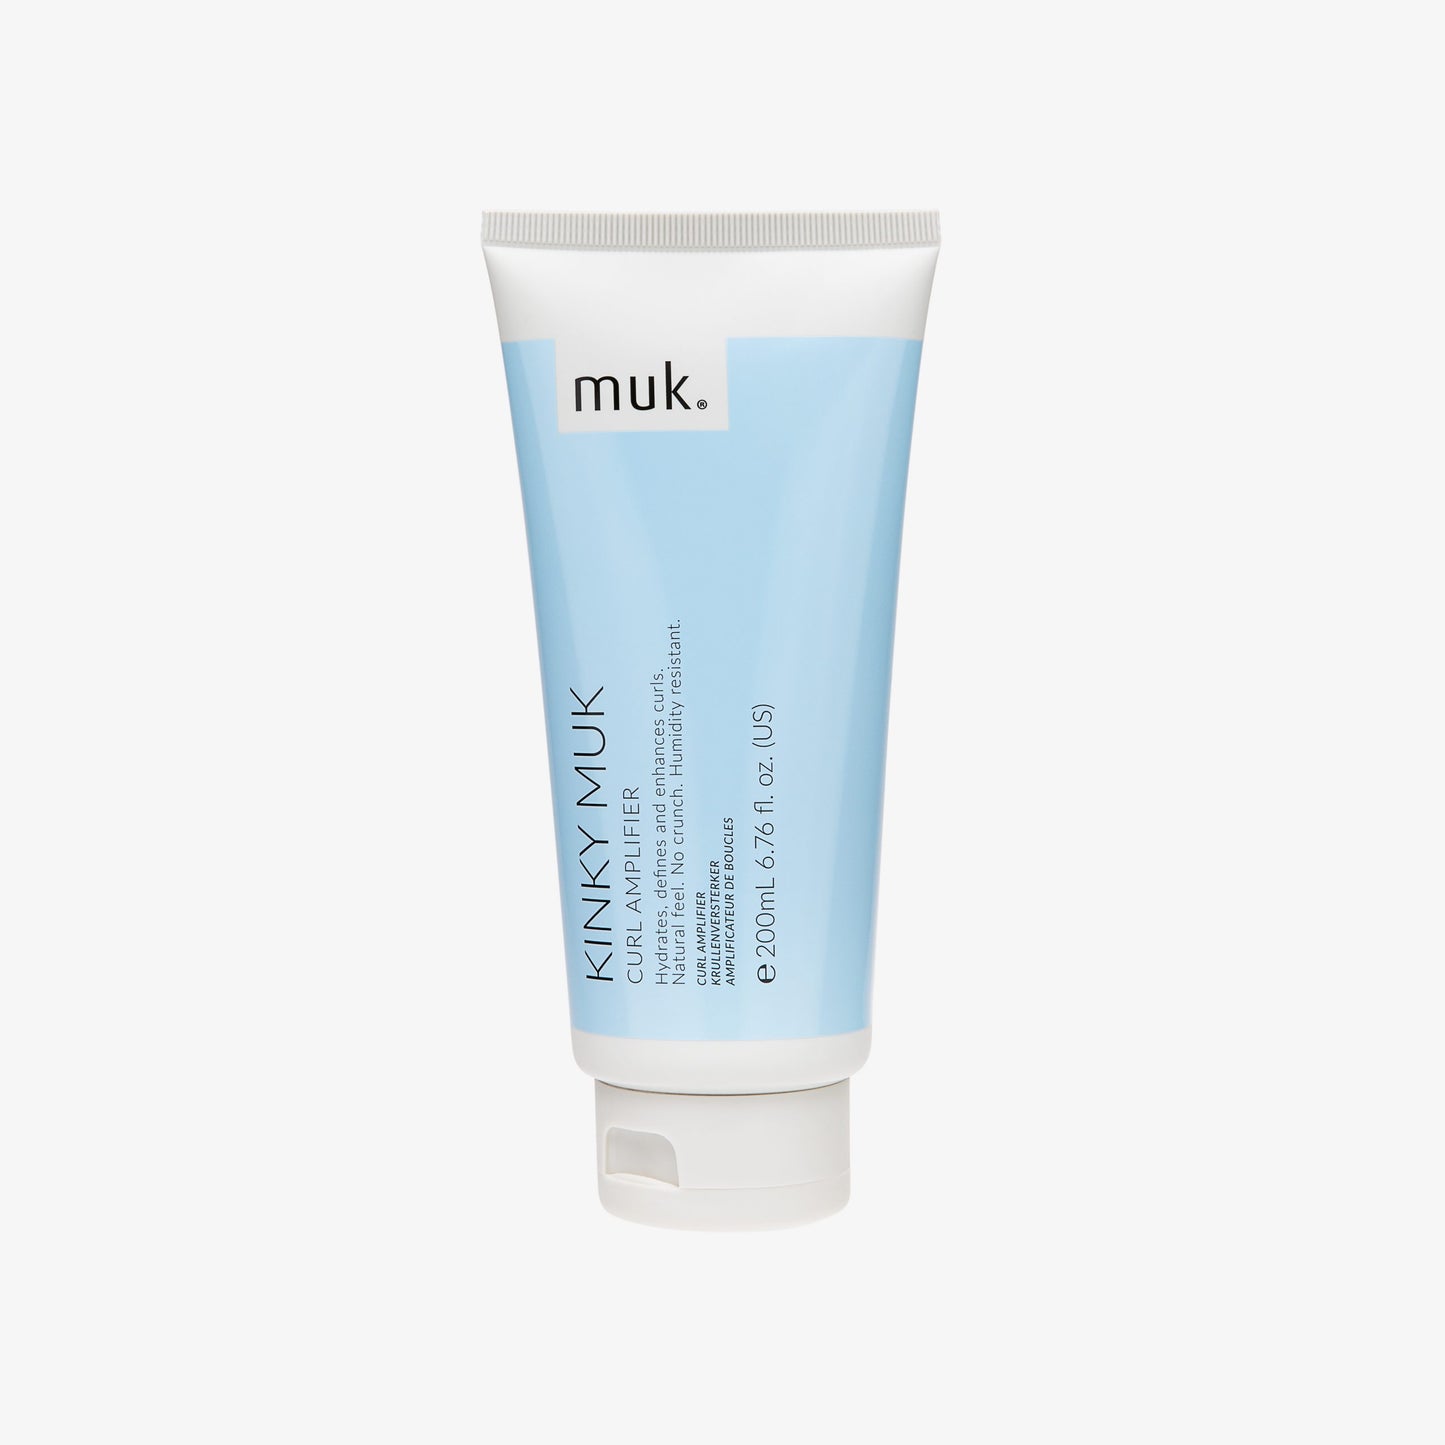 MUK Haircare Curl Amplifier 200ml